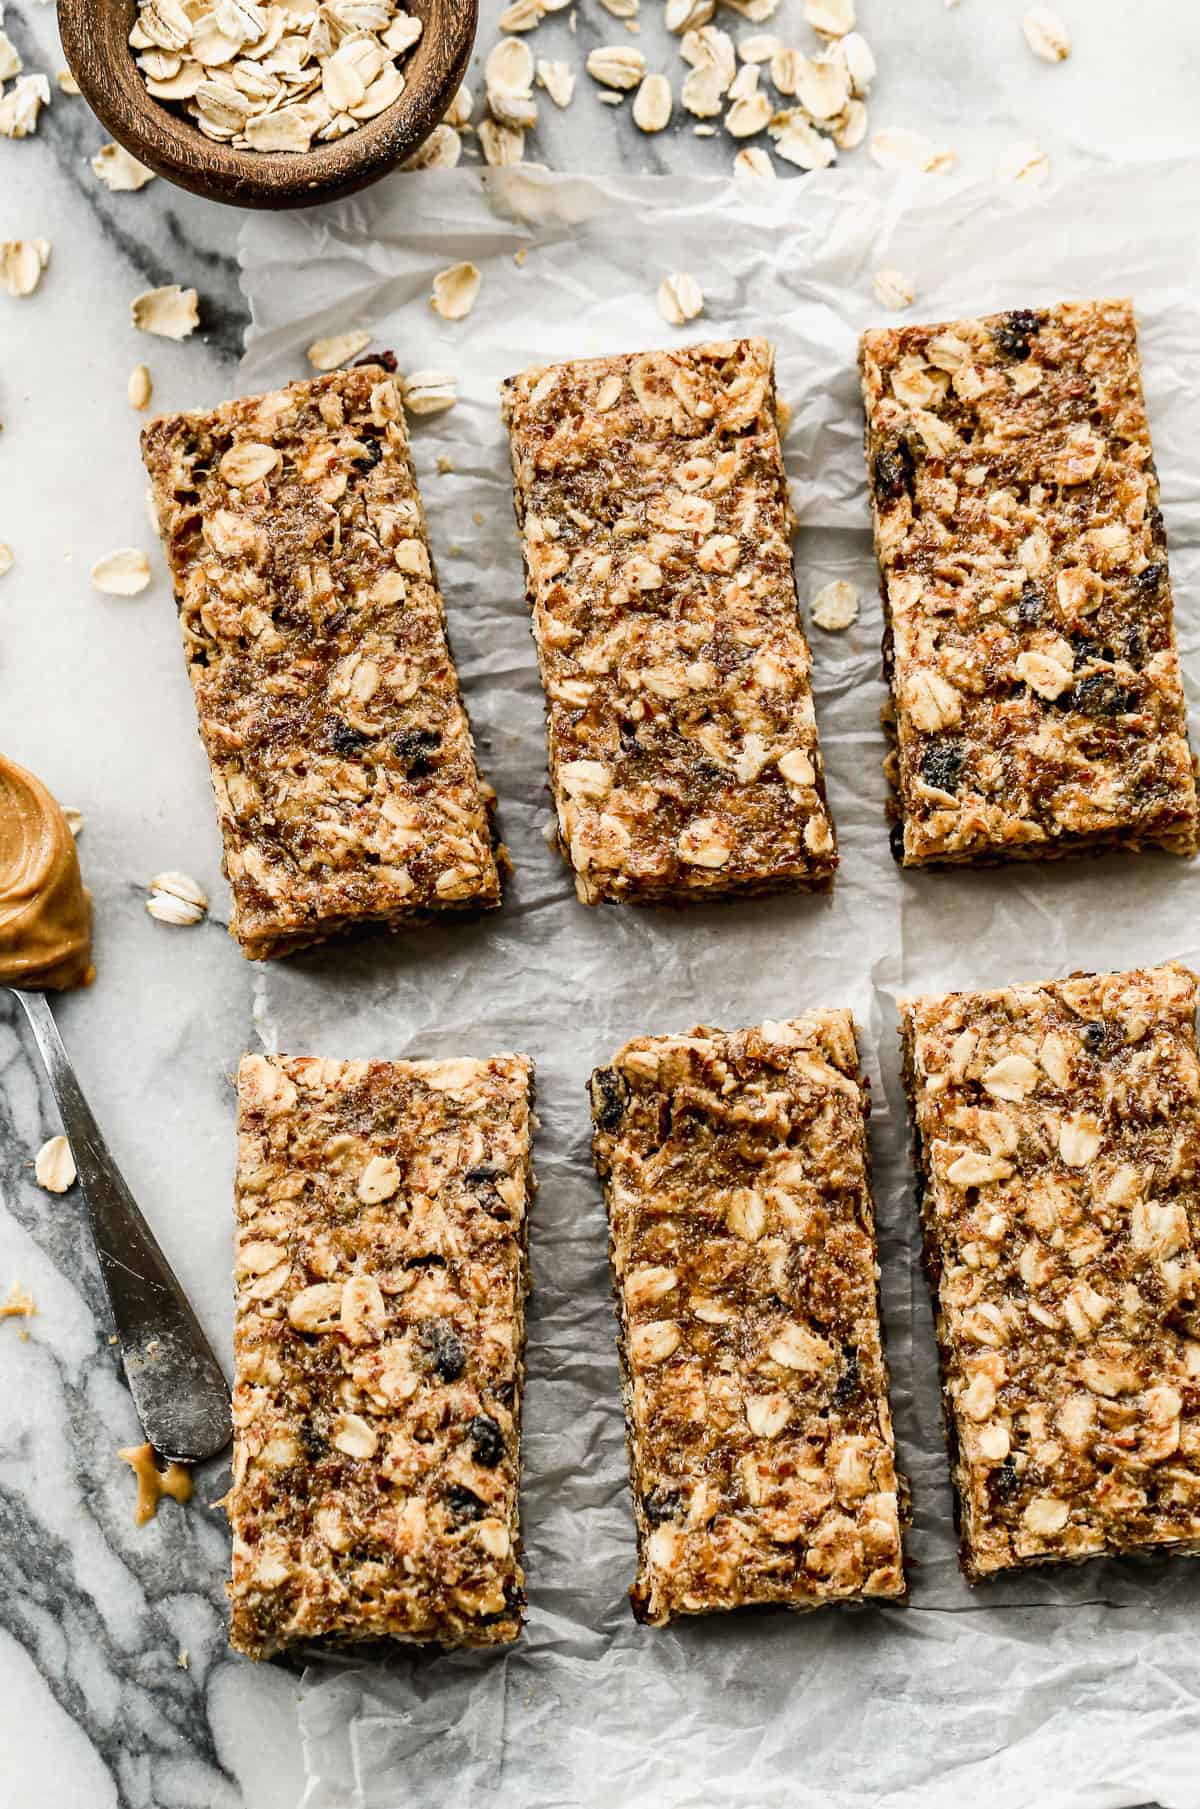 A picture of homemade protein bars cut into bars and ready to enjoy.